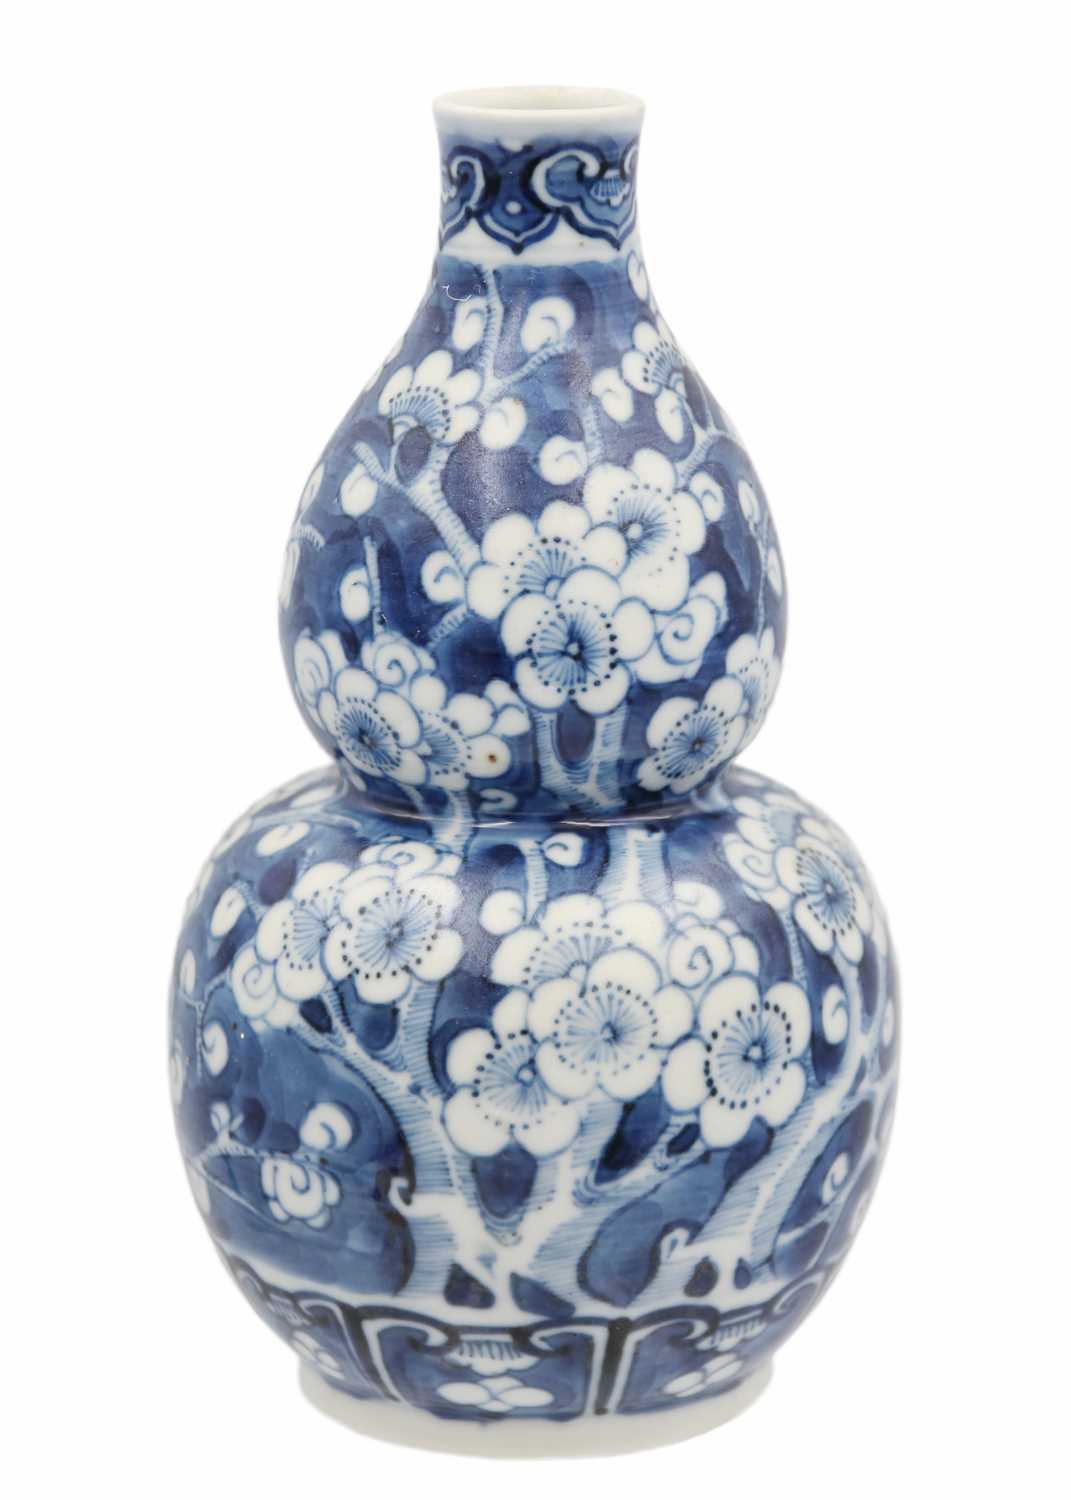 A Chinese porcelain prunus pattern double gourd vase, early 20th century.